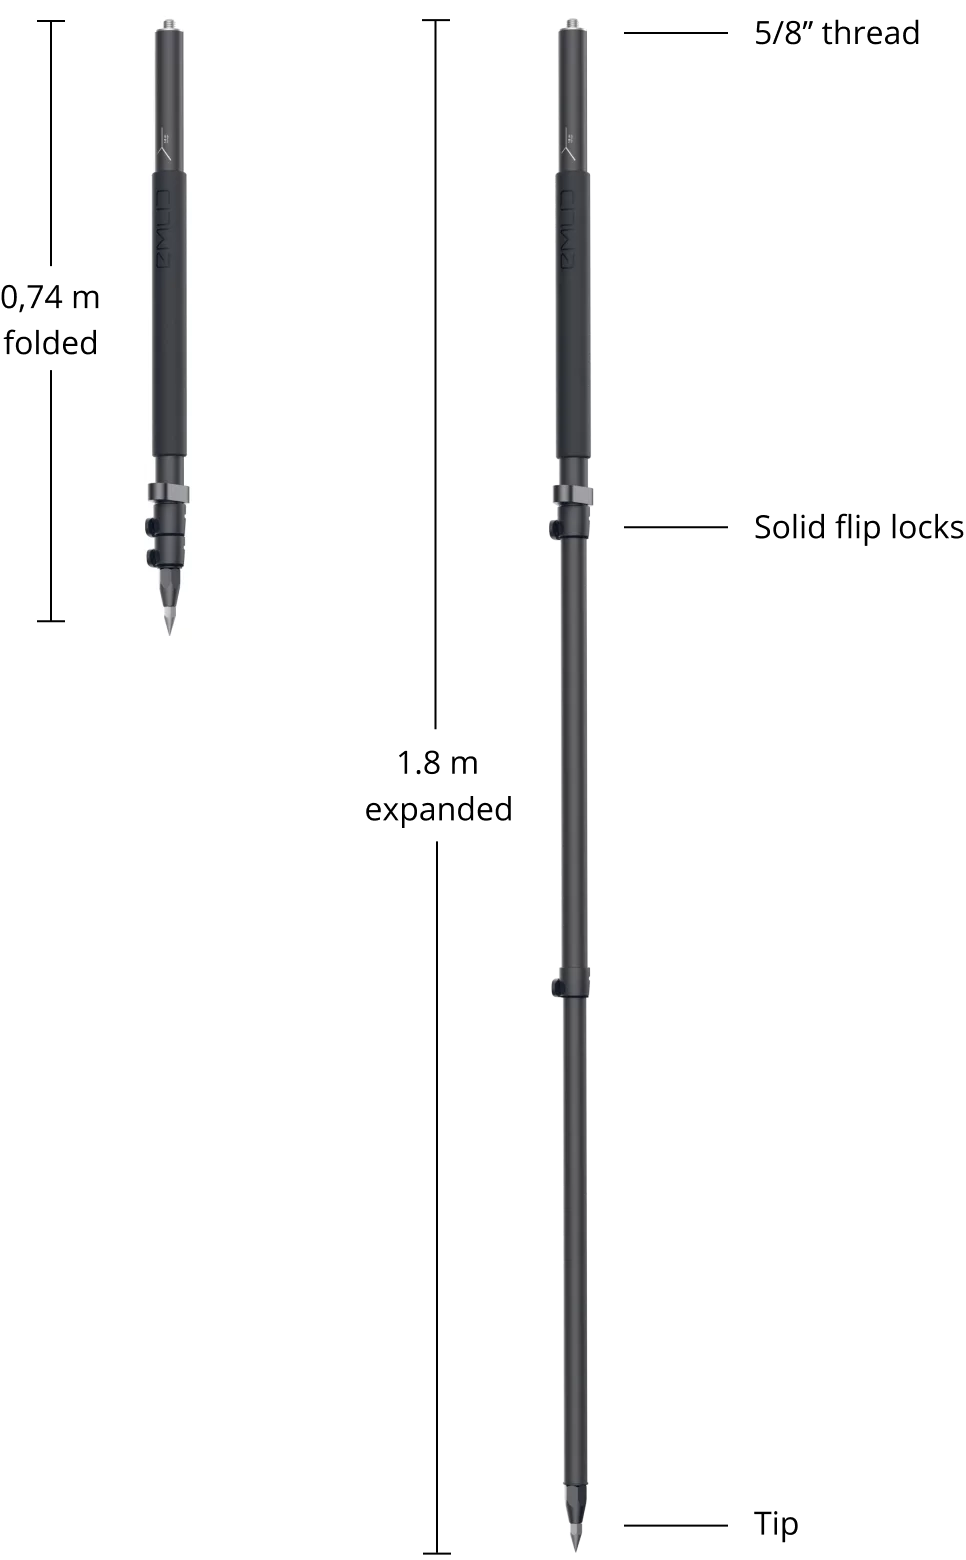 EMLID Telescopic Alu Pole 1.8m for RS2/RS+ (no holder) image 2_EPOTRONIC